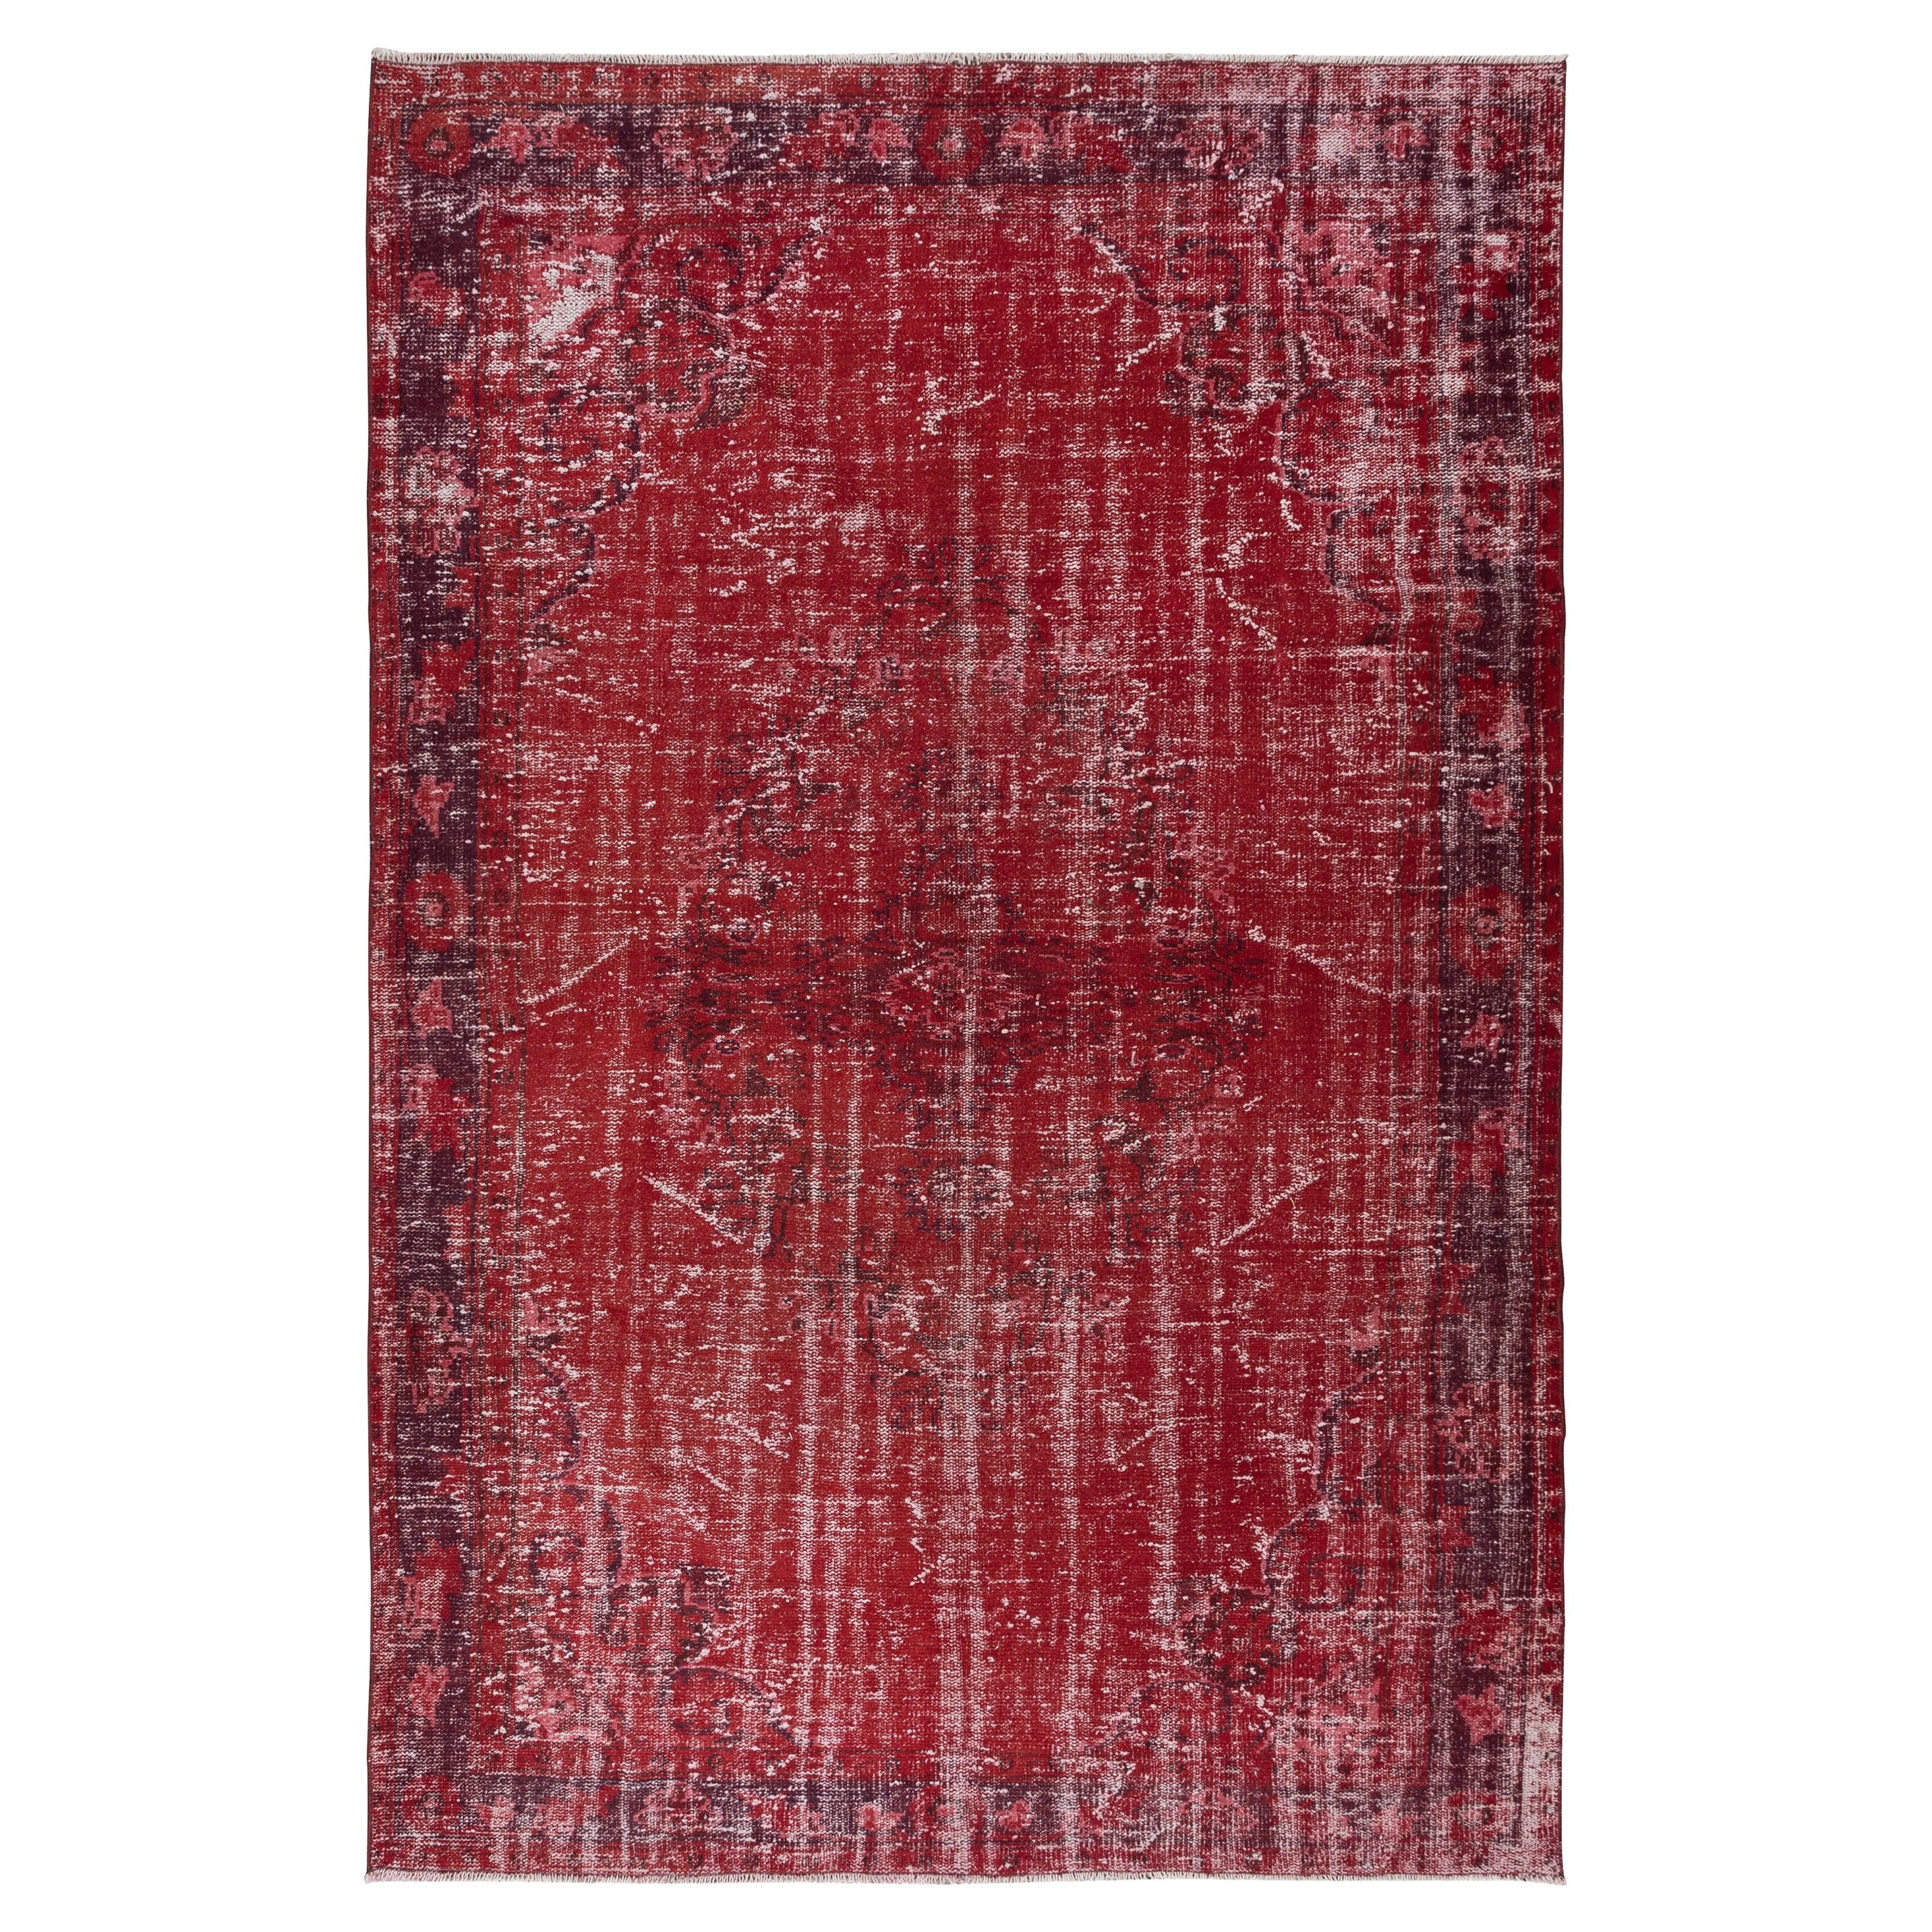 6x9.2 Ft Contemporary Handmade Turkish Red Area Rug with Shabby Chic Style